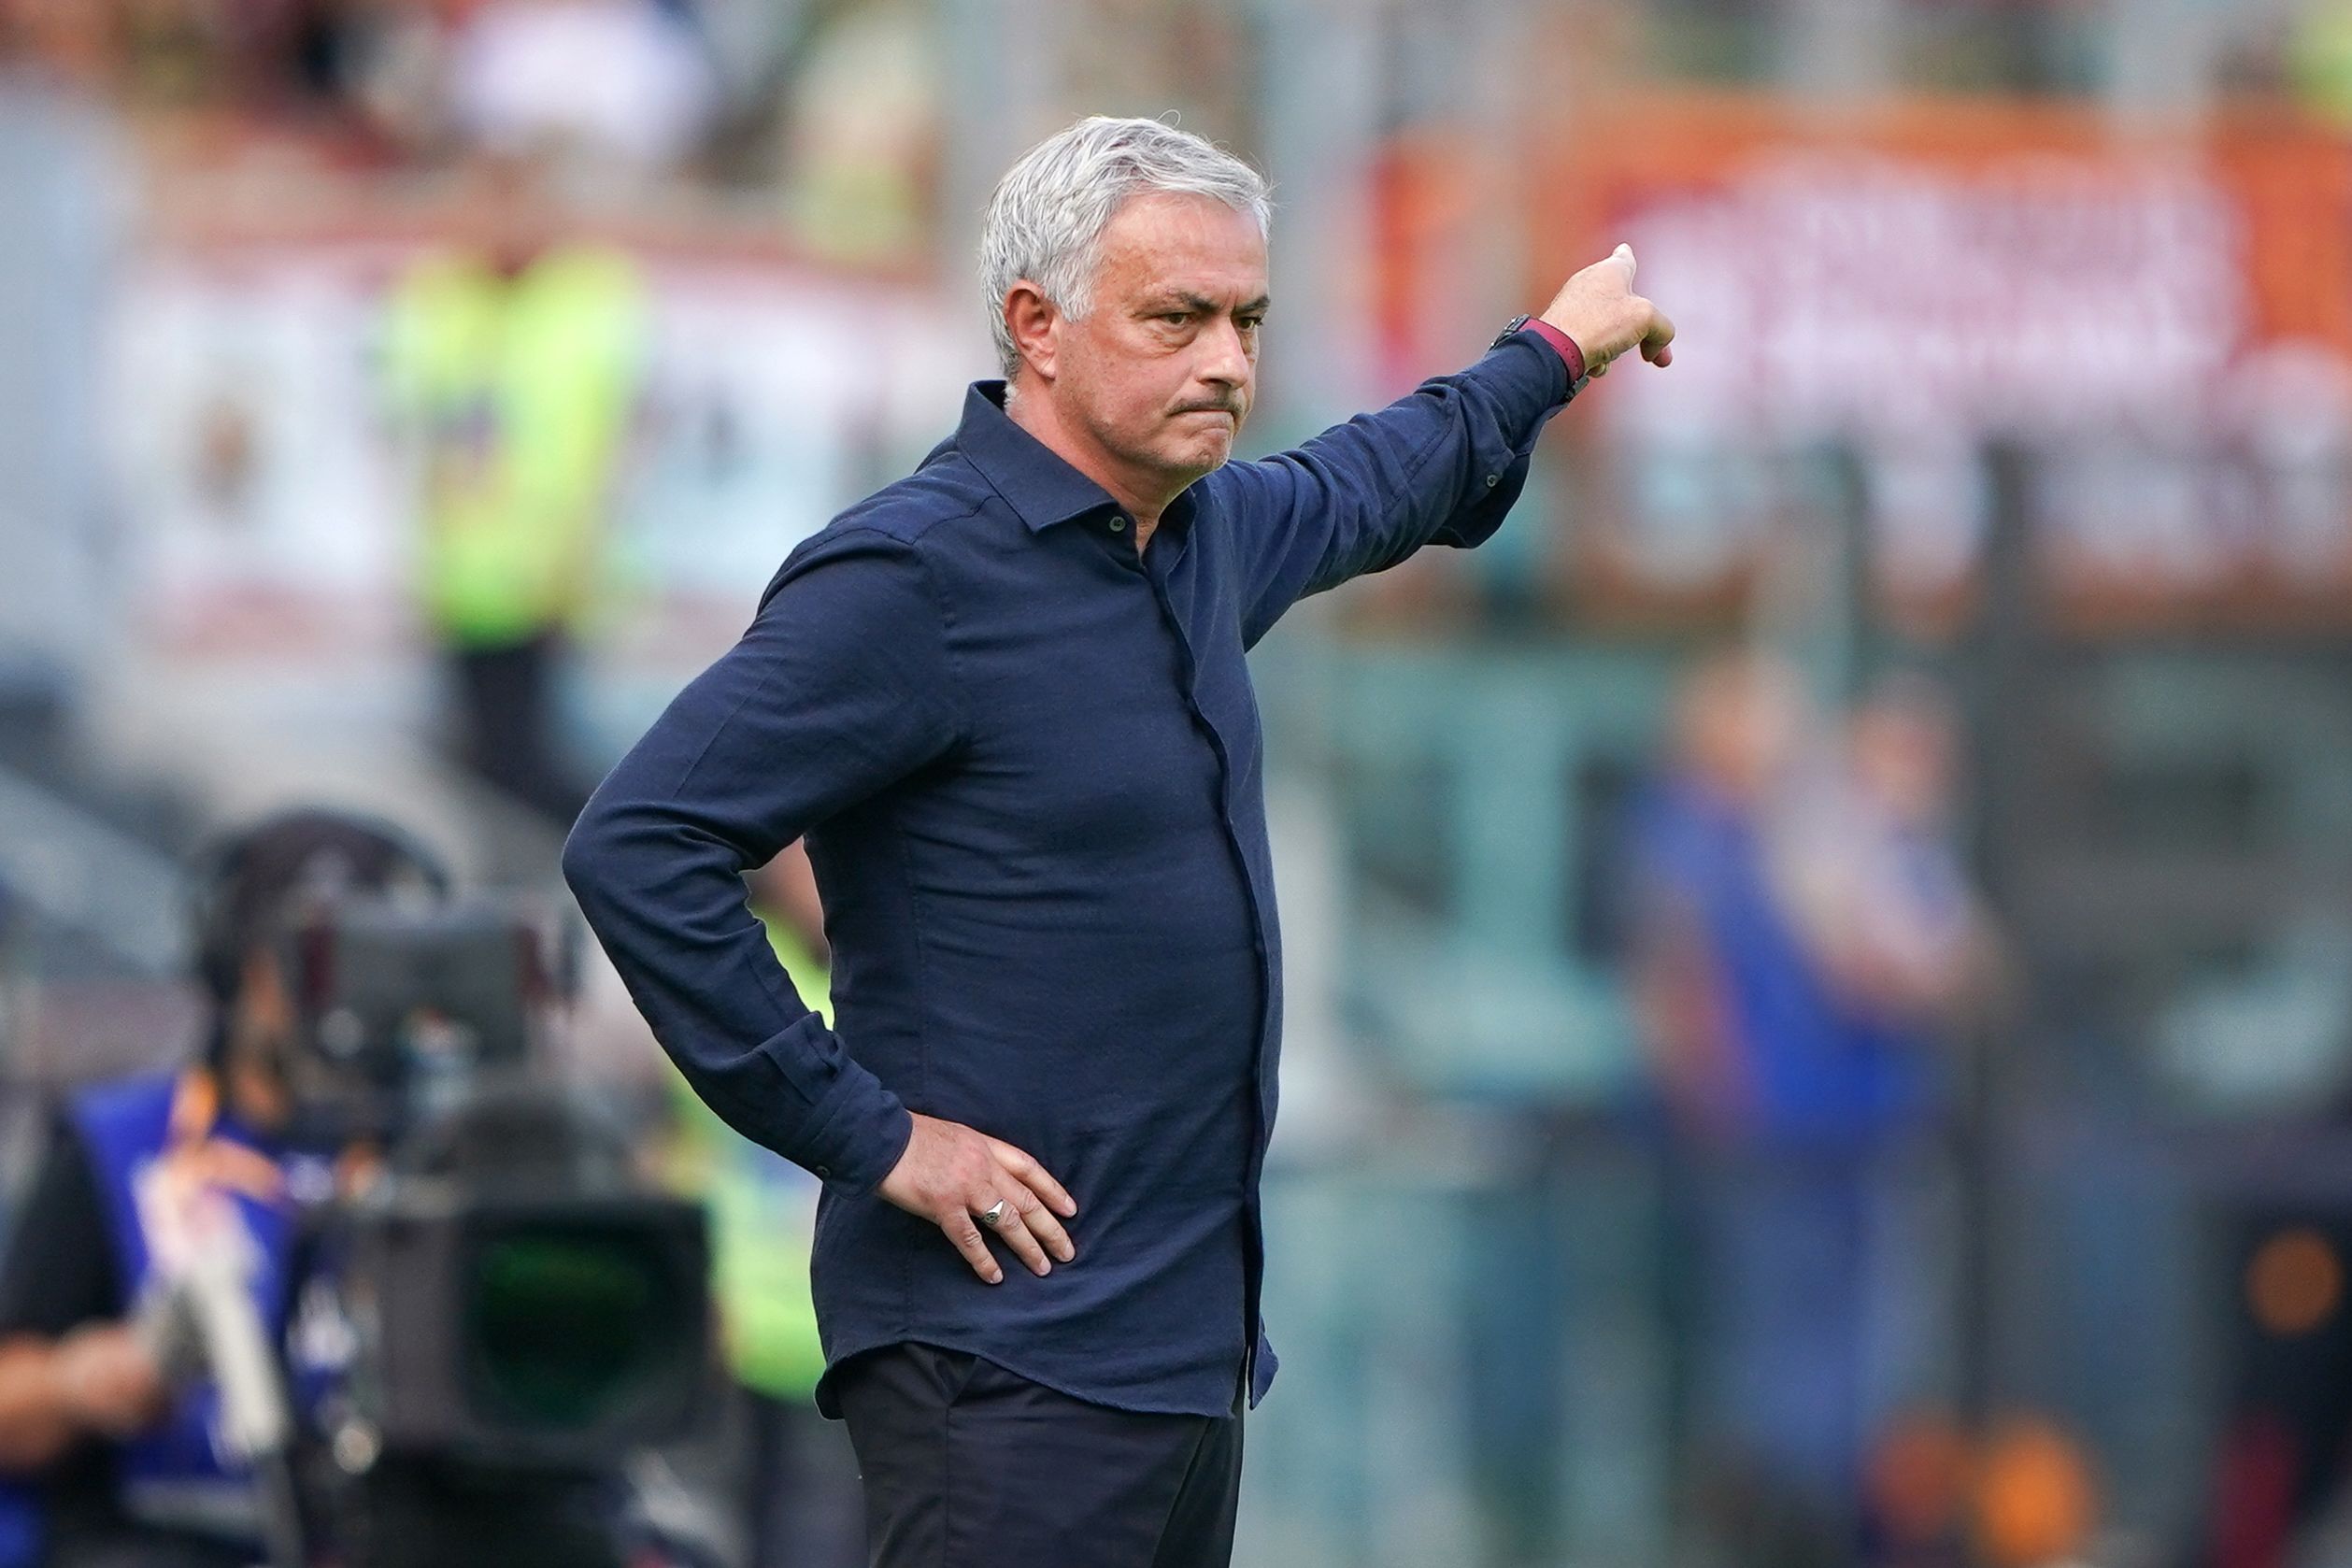 Jose Mourinho: AS Roma sacks manager with 'immediate effect' and